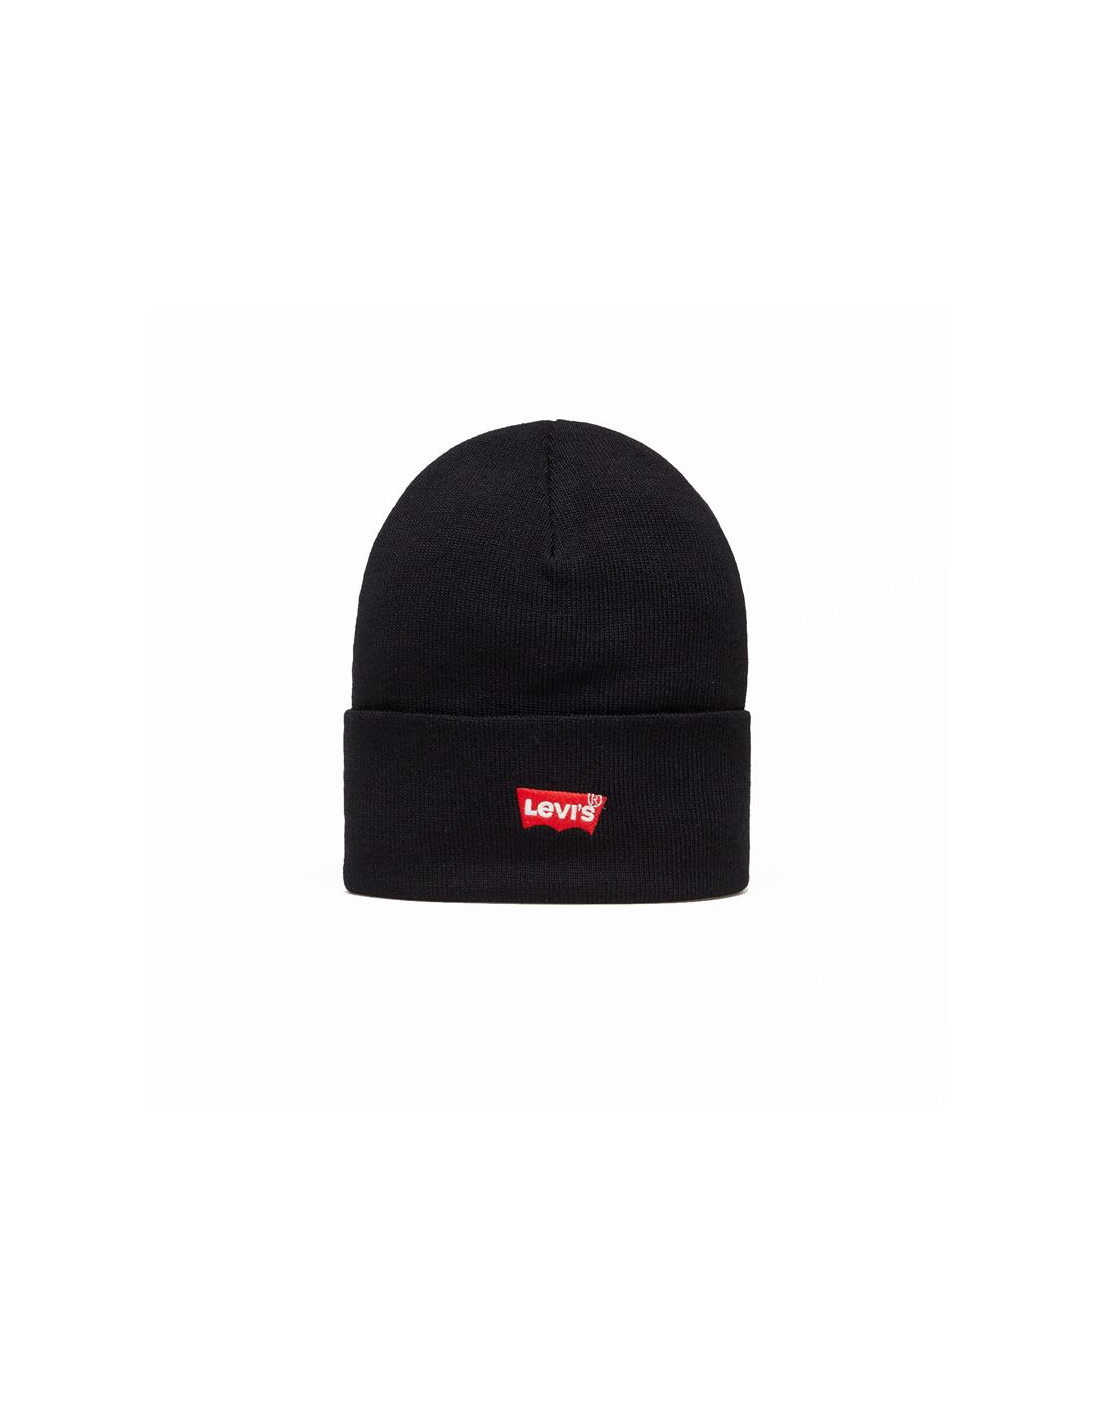 Gorro levi's red batwing embroidered beanie regular black product